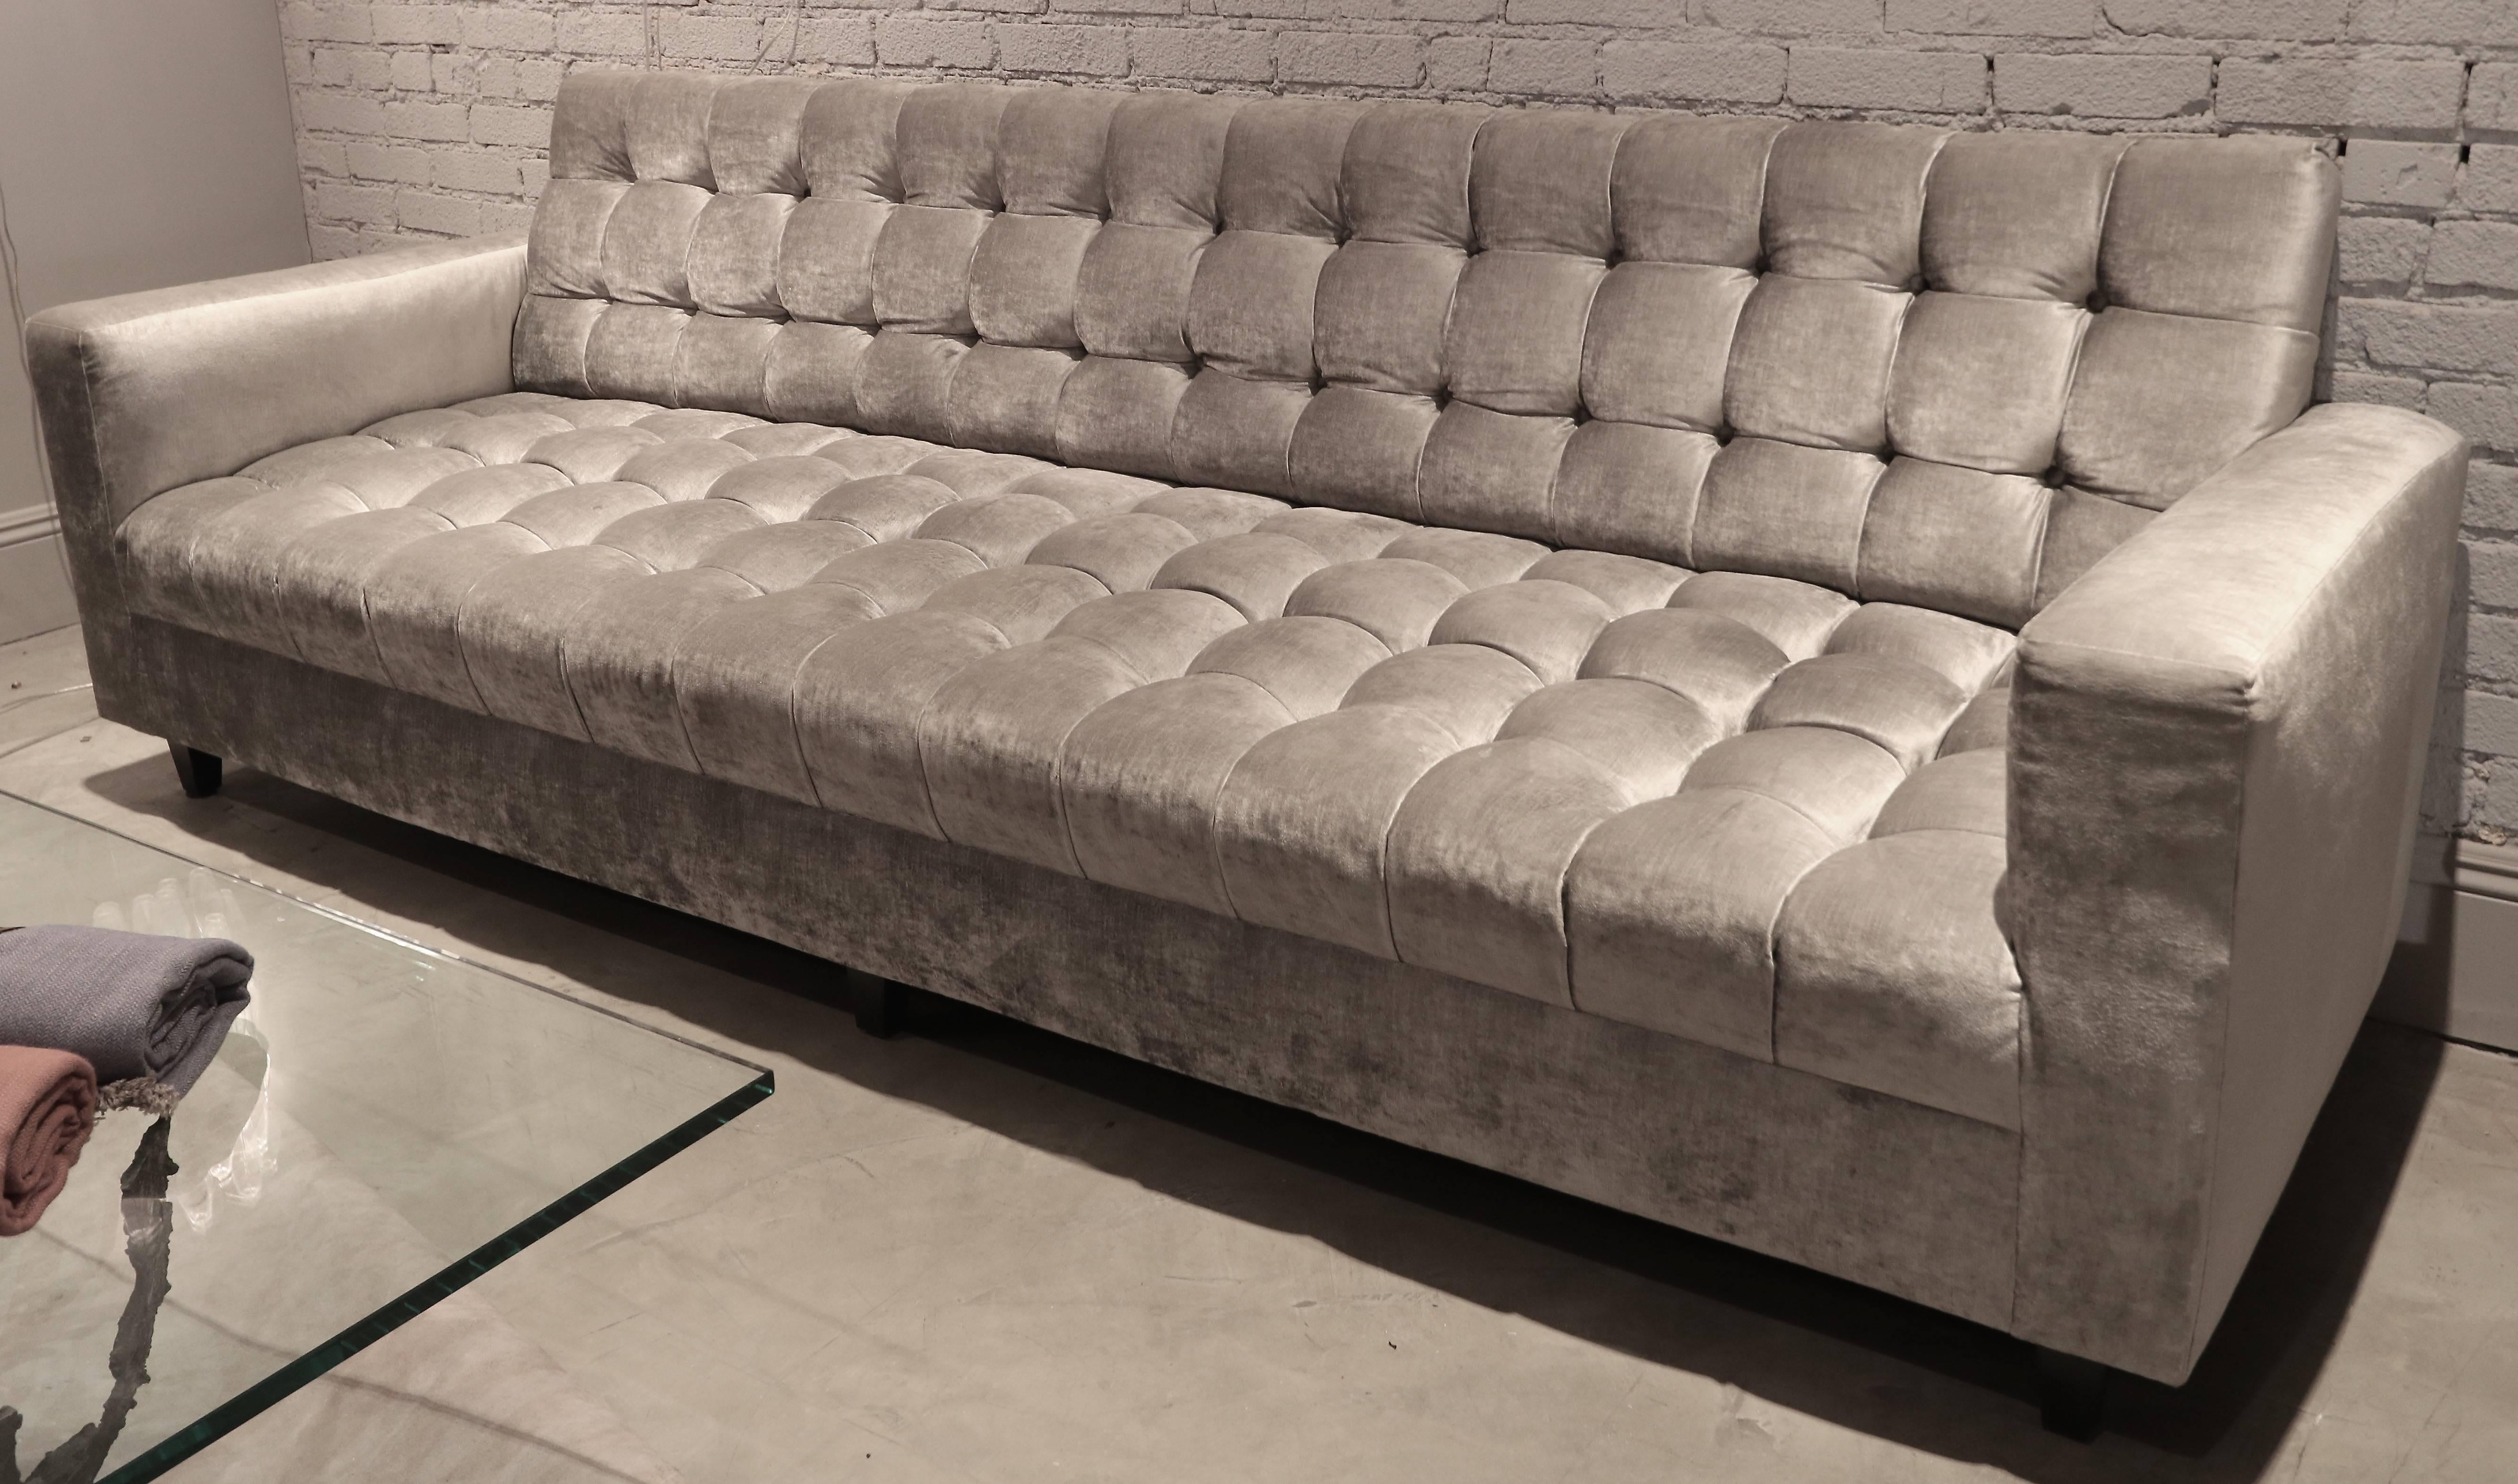 Custom tufted sofa upholstered in grey brussels velvet. Made in Los Angeles by Adesso Imports. Can be done in different sizes and colors.